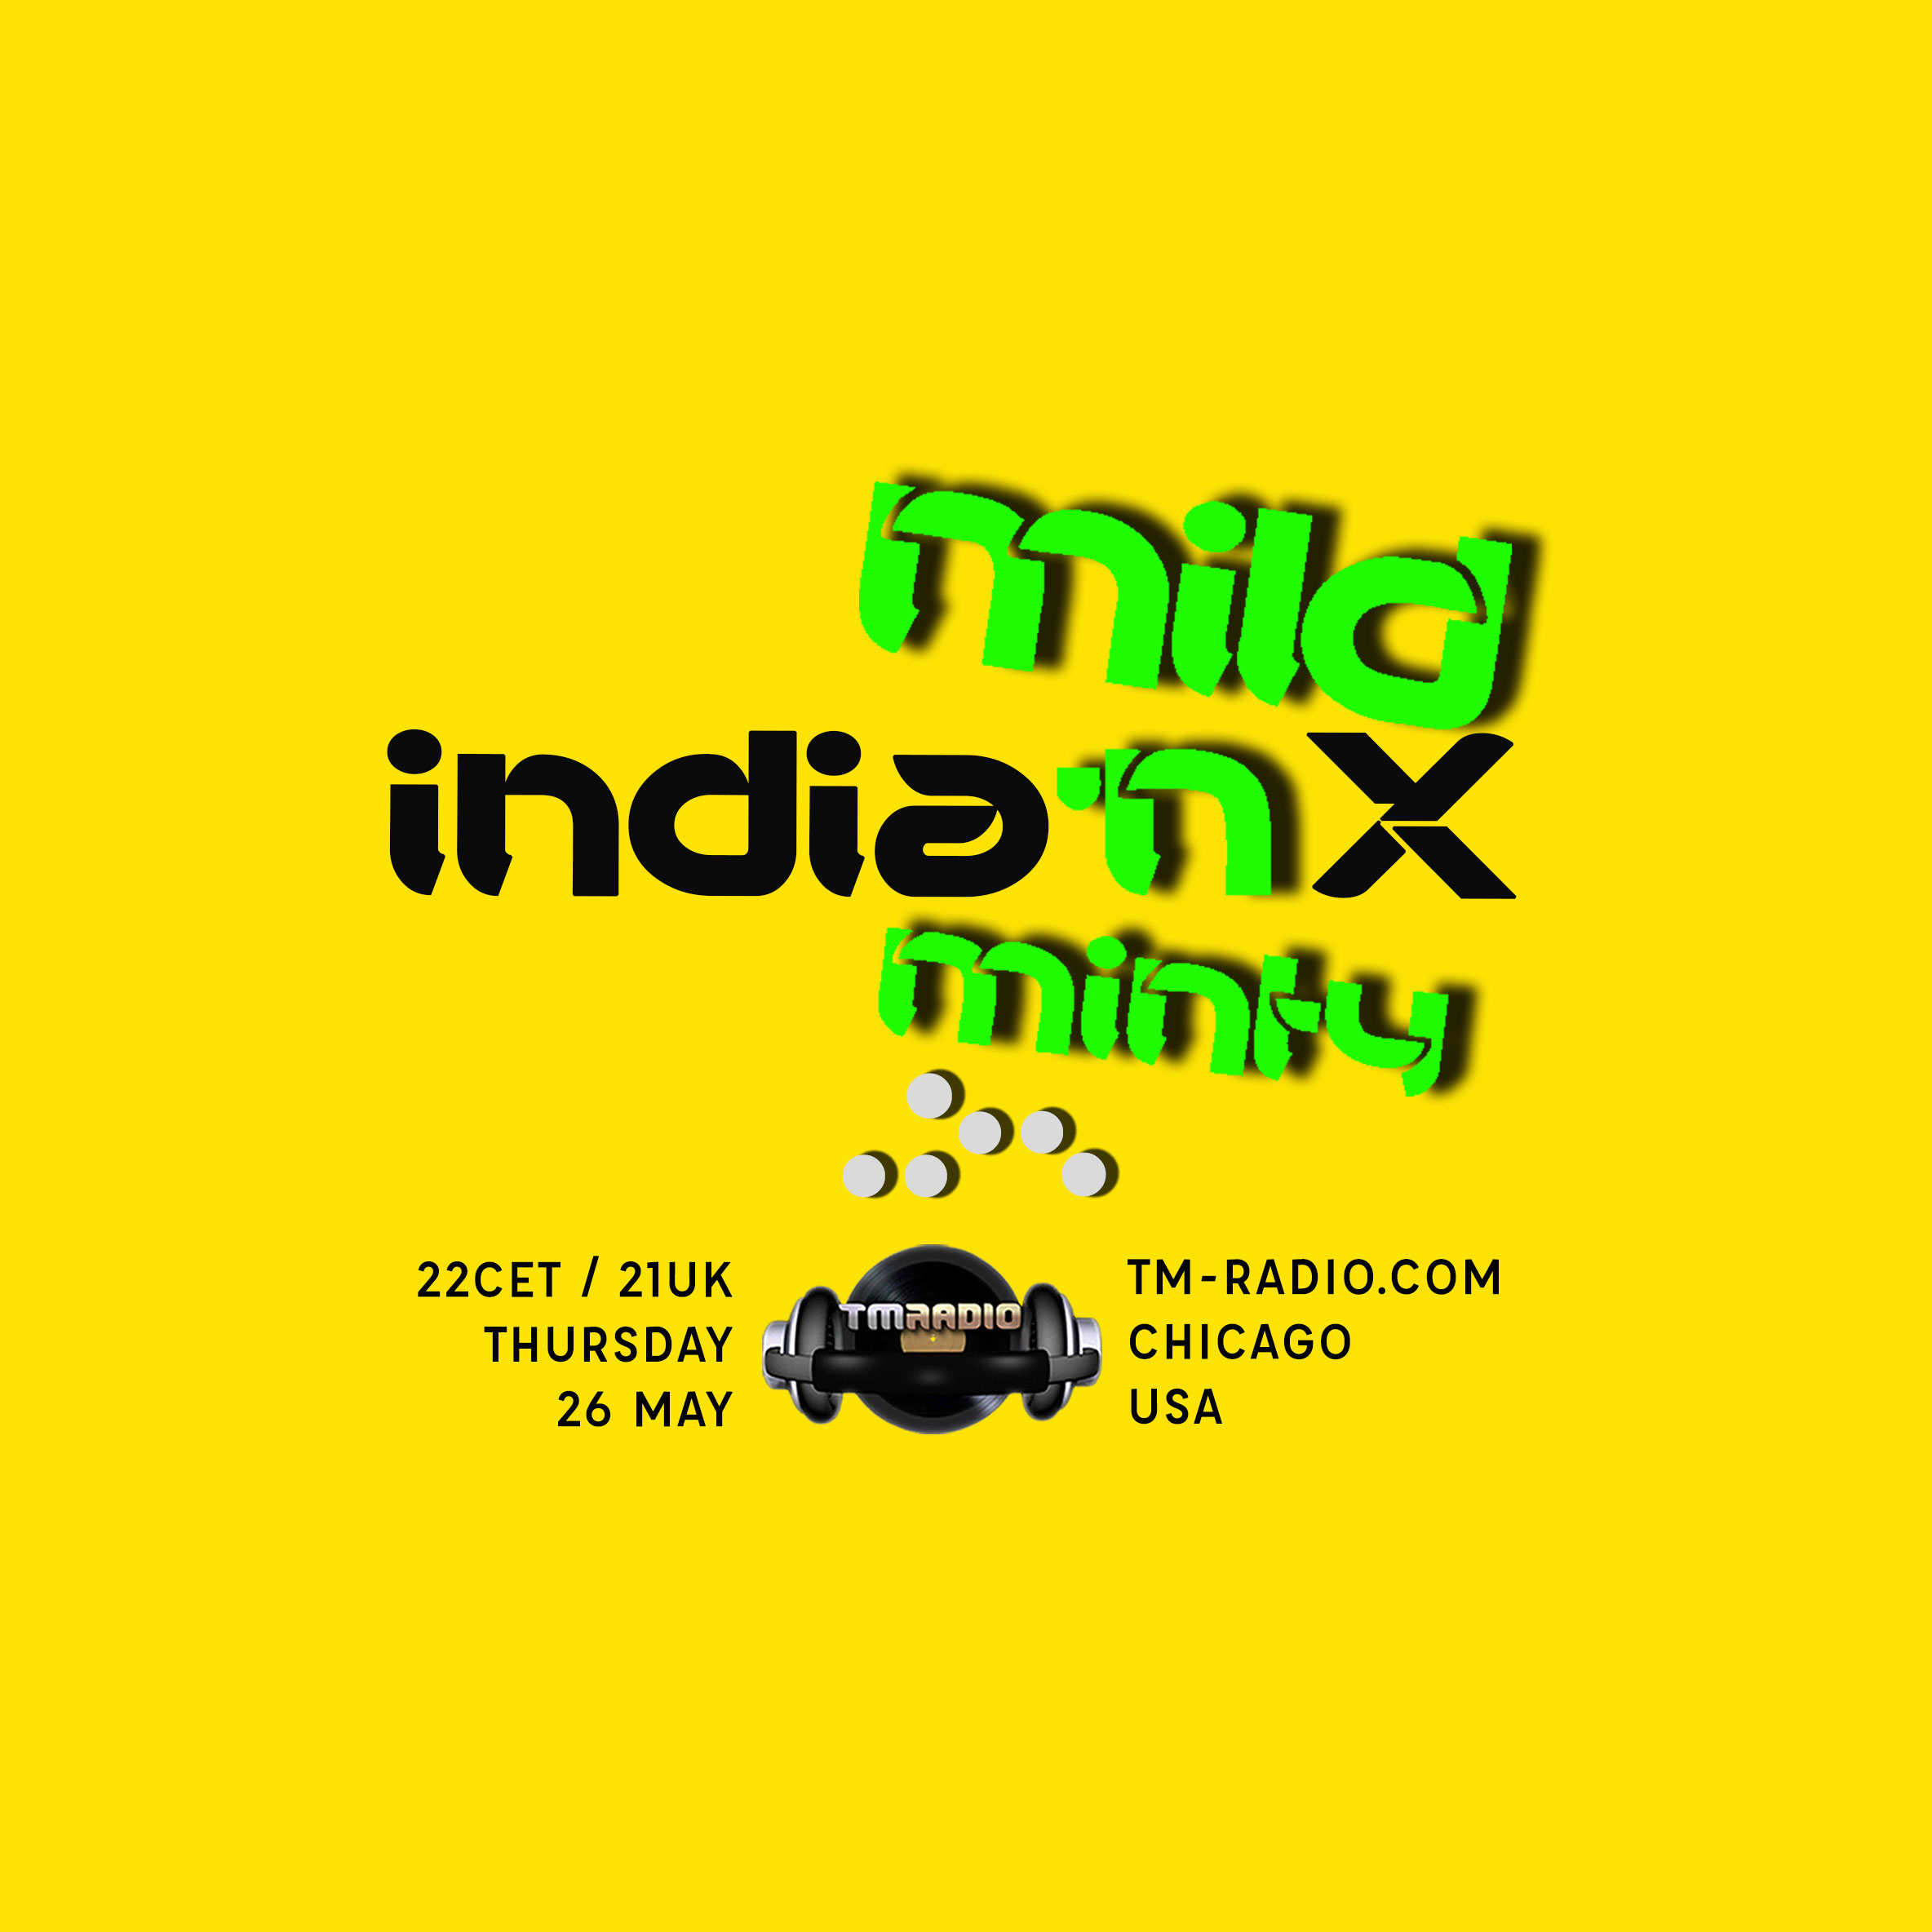 Mild 'N Minty :: Mild 'N Minty N°84 (aired on May 26th) banner logo